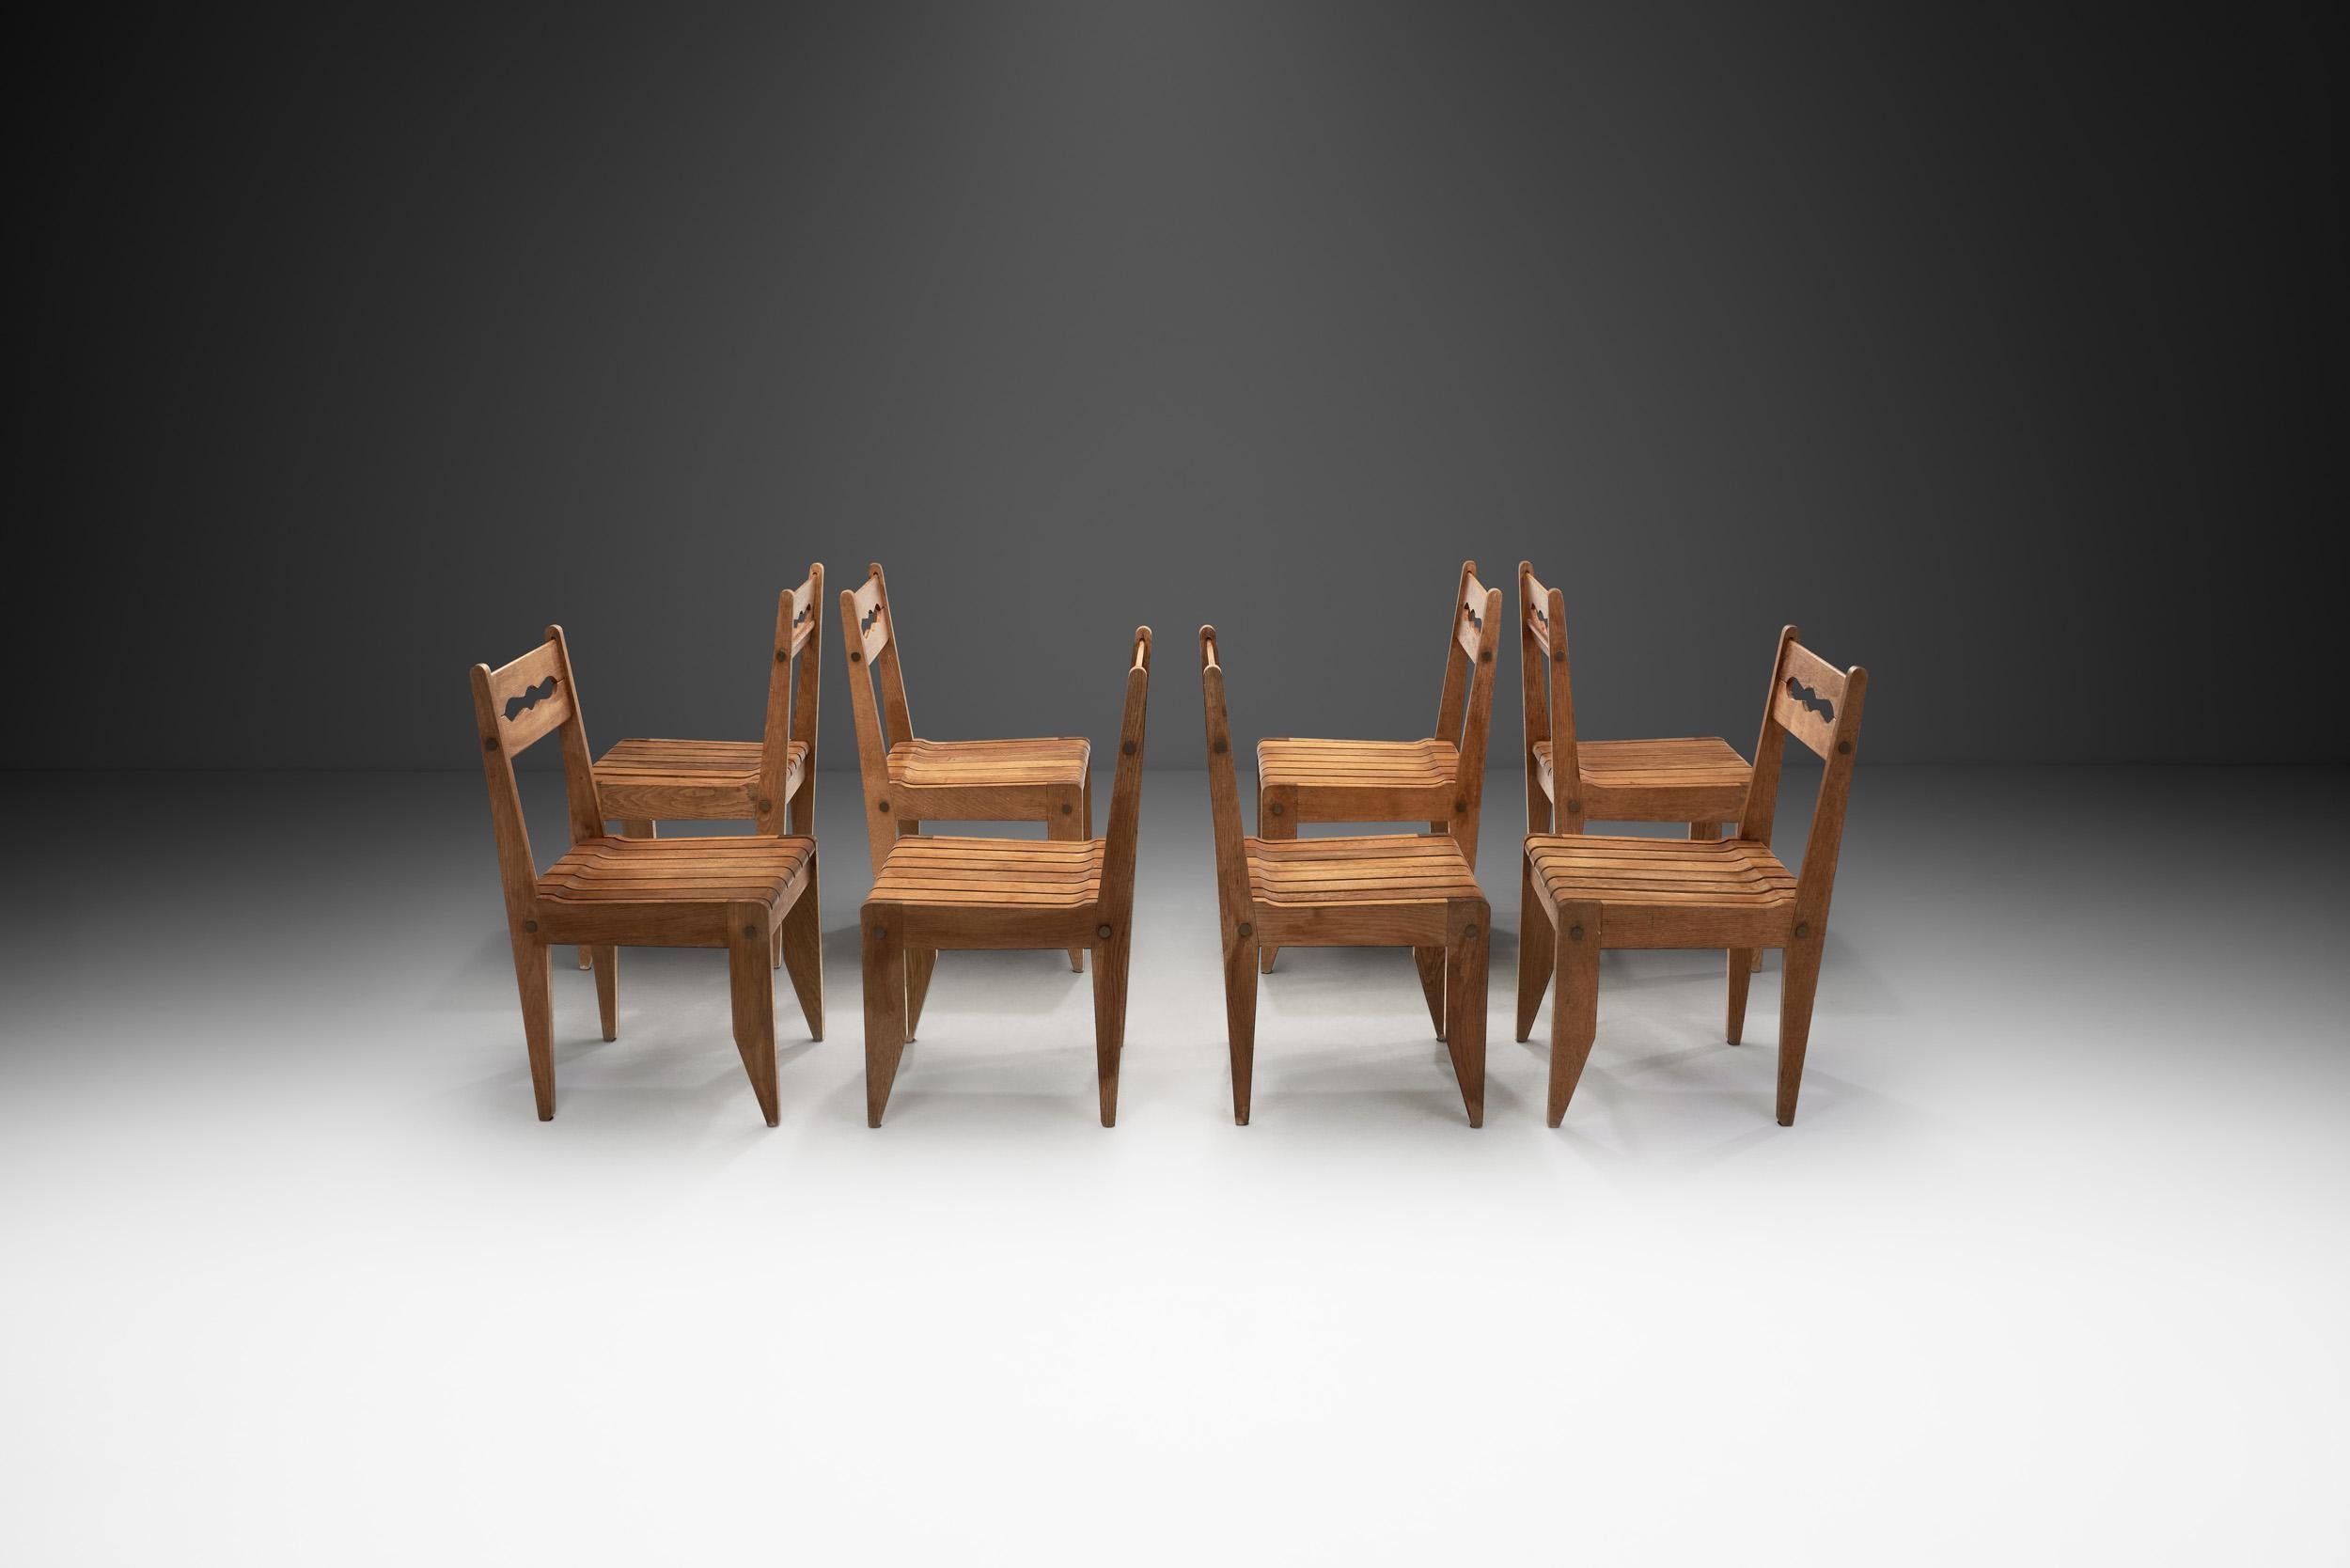 French Guillerme et Chambron Oak Chairs with Wooden Slatted Seats, France 1960s For Sale